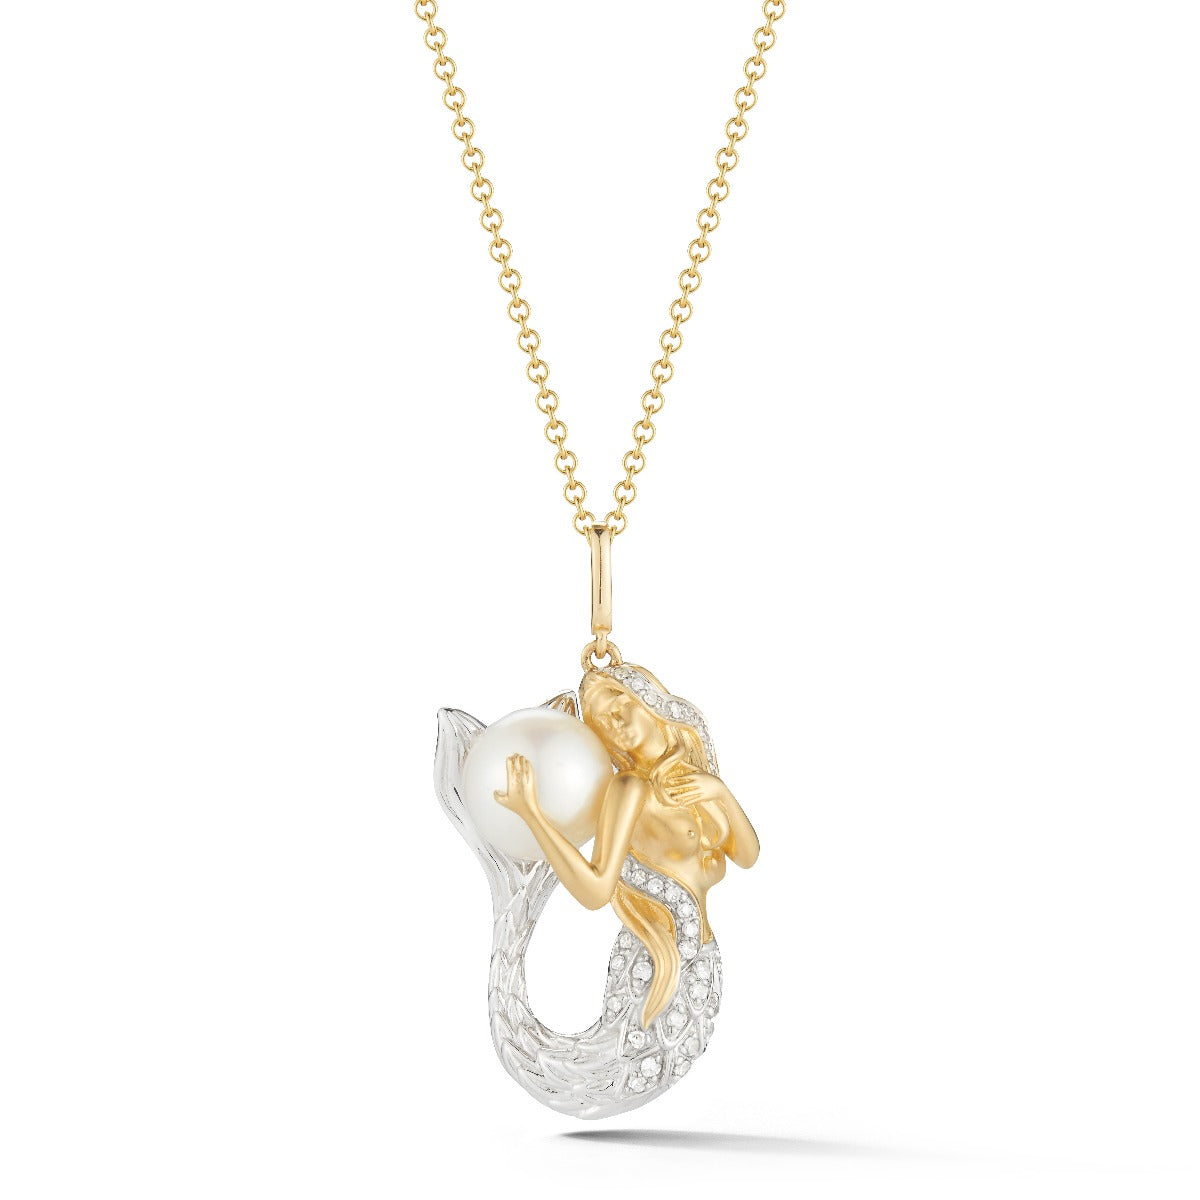 14K TWO TONE MERMAID PENDANT HOLDING AN 8MM FRESH WATER PEARL WITH 0.15CT DIAMONDS ON THE TAIL ON 18 INCHES CABLE CHAIN